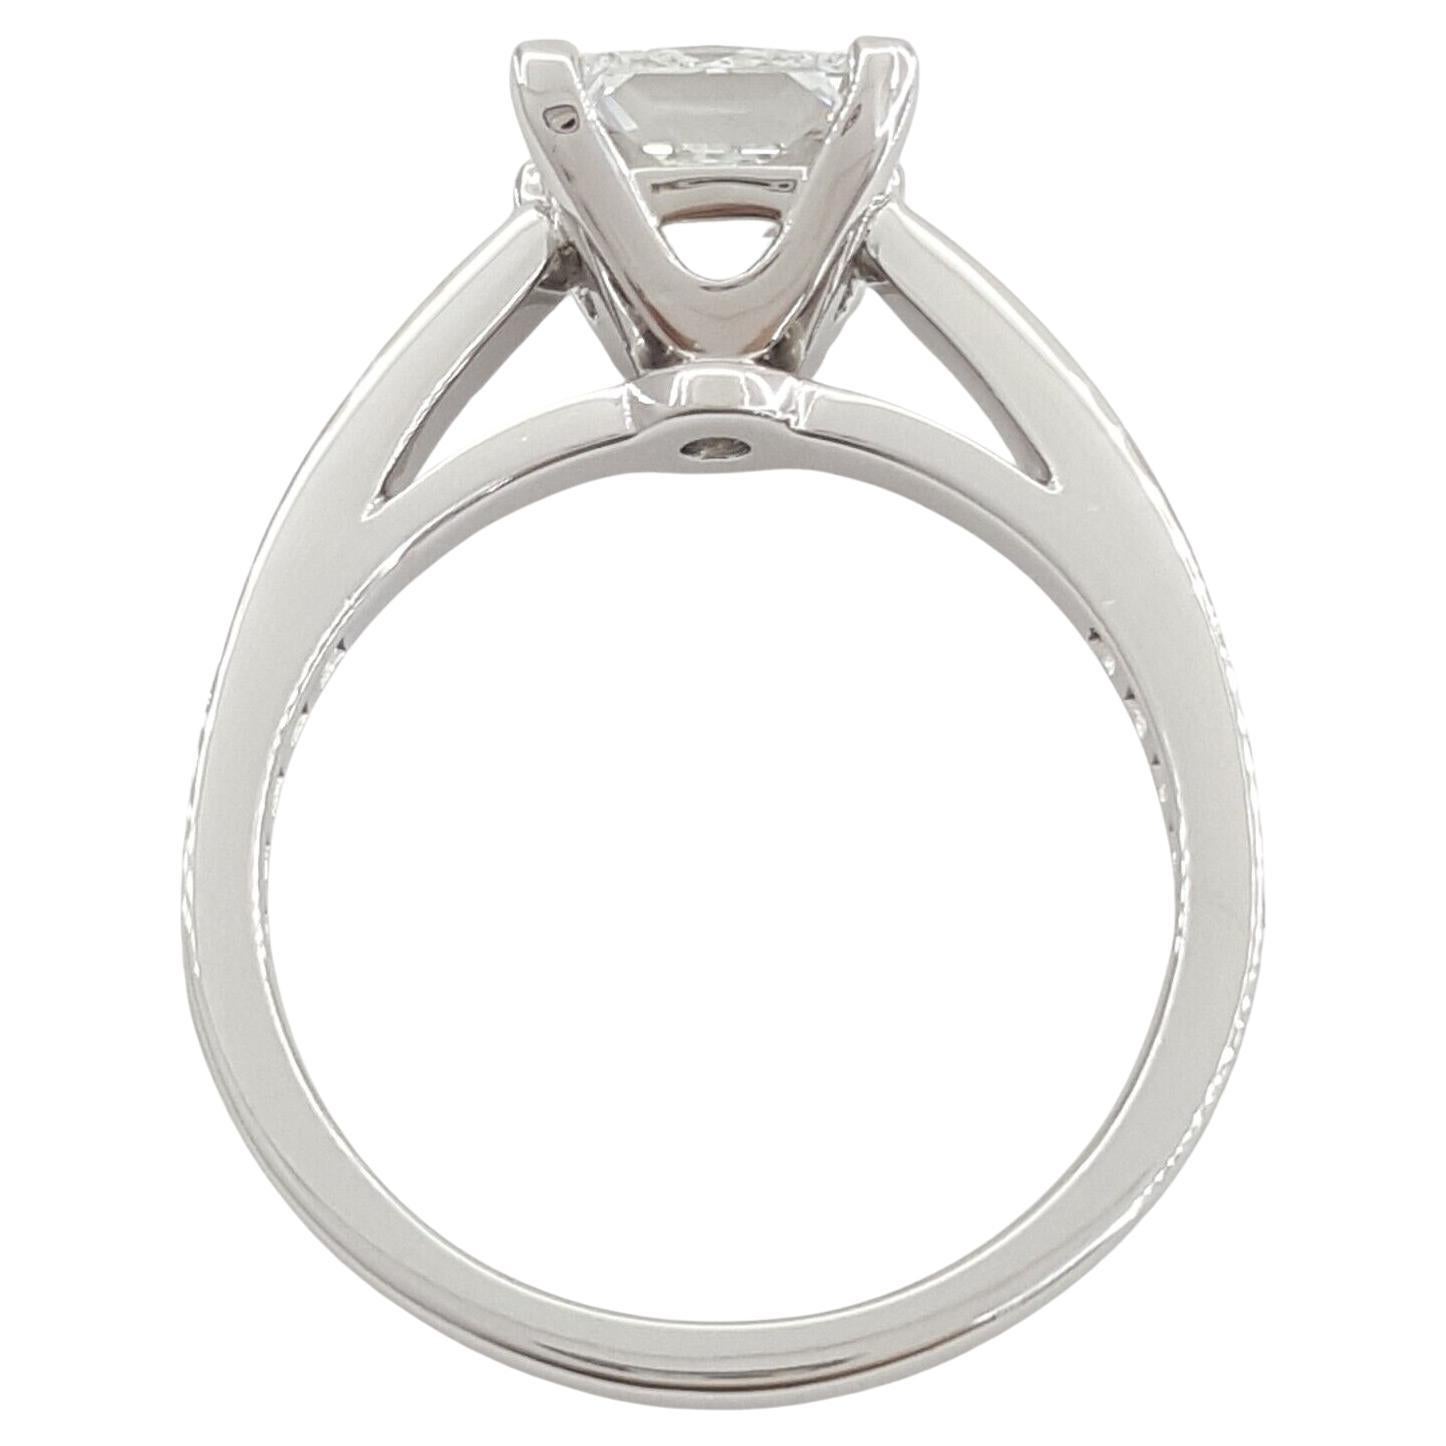 Tiffany & Co. NOVO Platinum Princess Brilliant Cut Diamond Engagement Ring.

The ring weighs 6.2 grams, size 6.25 with a Princess Brilliant Cut Natural Diamond center stone weighing 1.76 ct, F in Color, VS1 in Clarity, Excellent Cut, Polish & Very